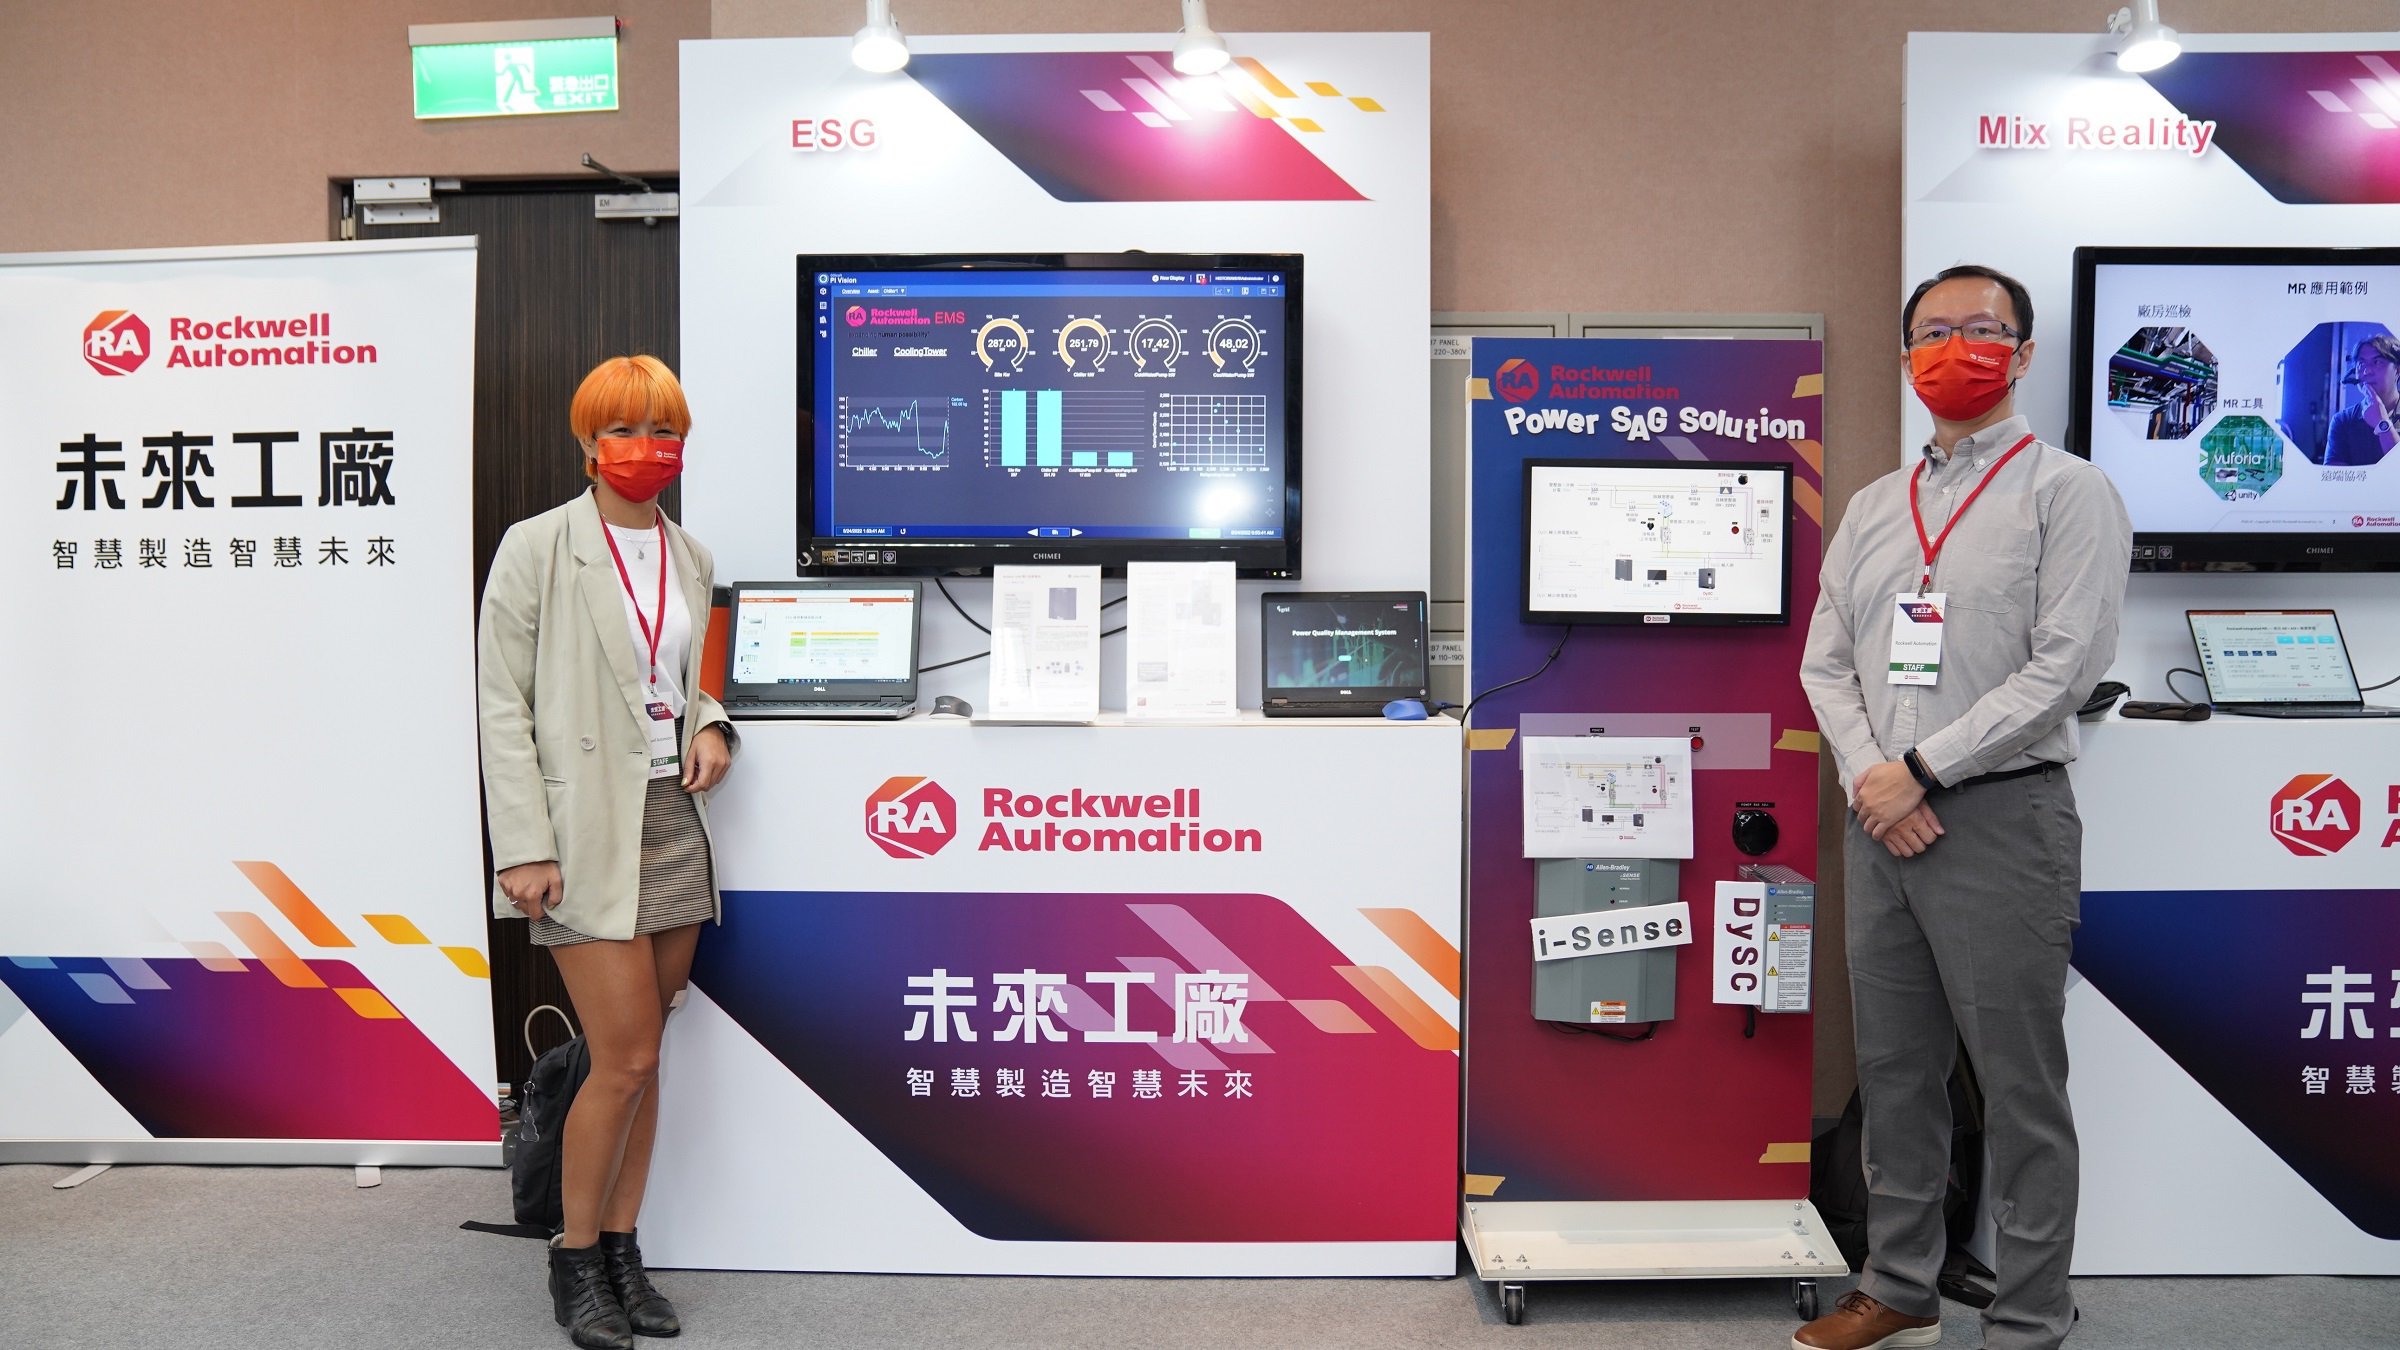 TW automation show picture taken by photographer in the event with TCE team member stand in front of  ESG booth